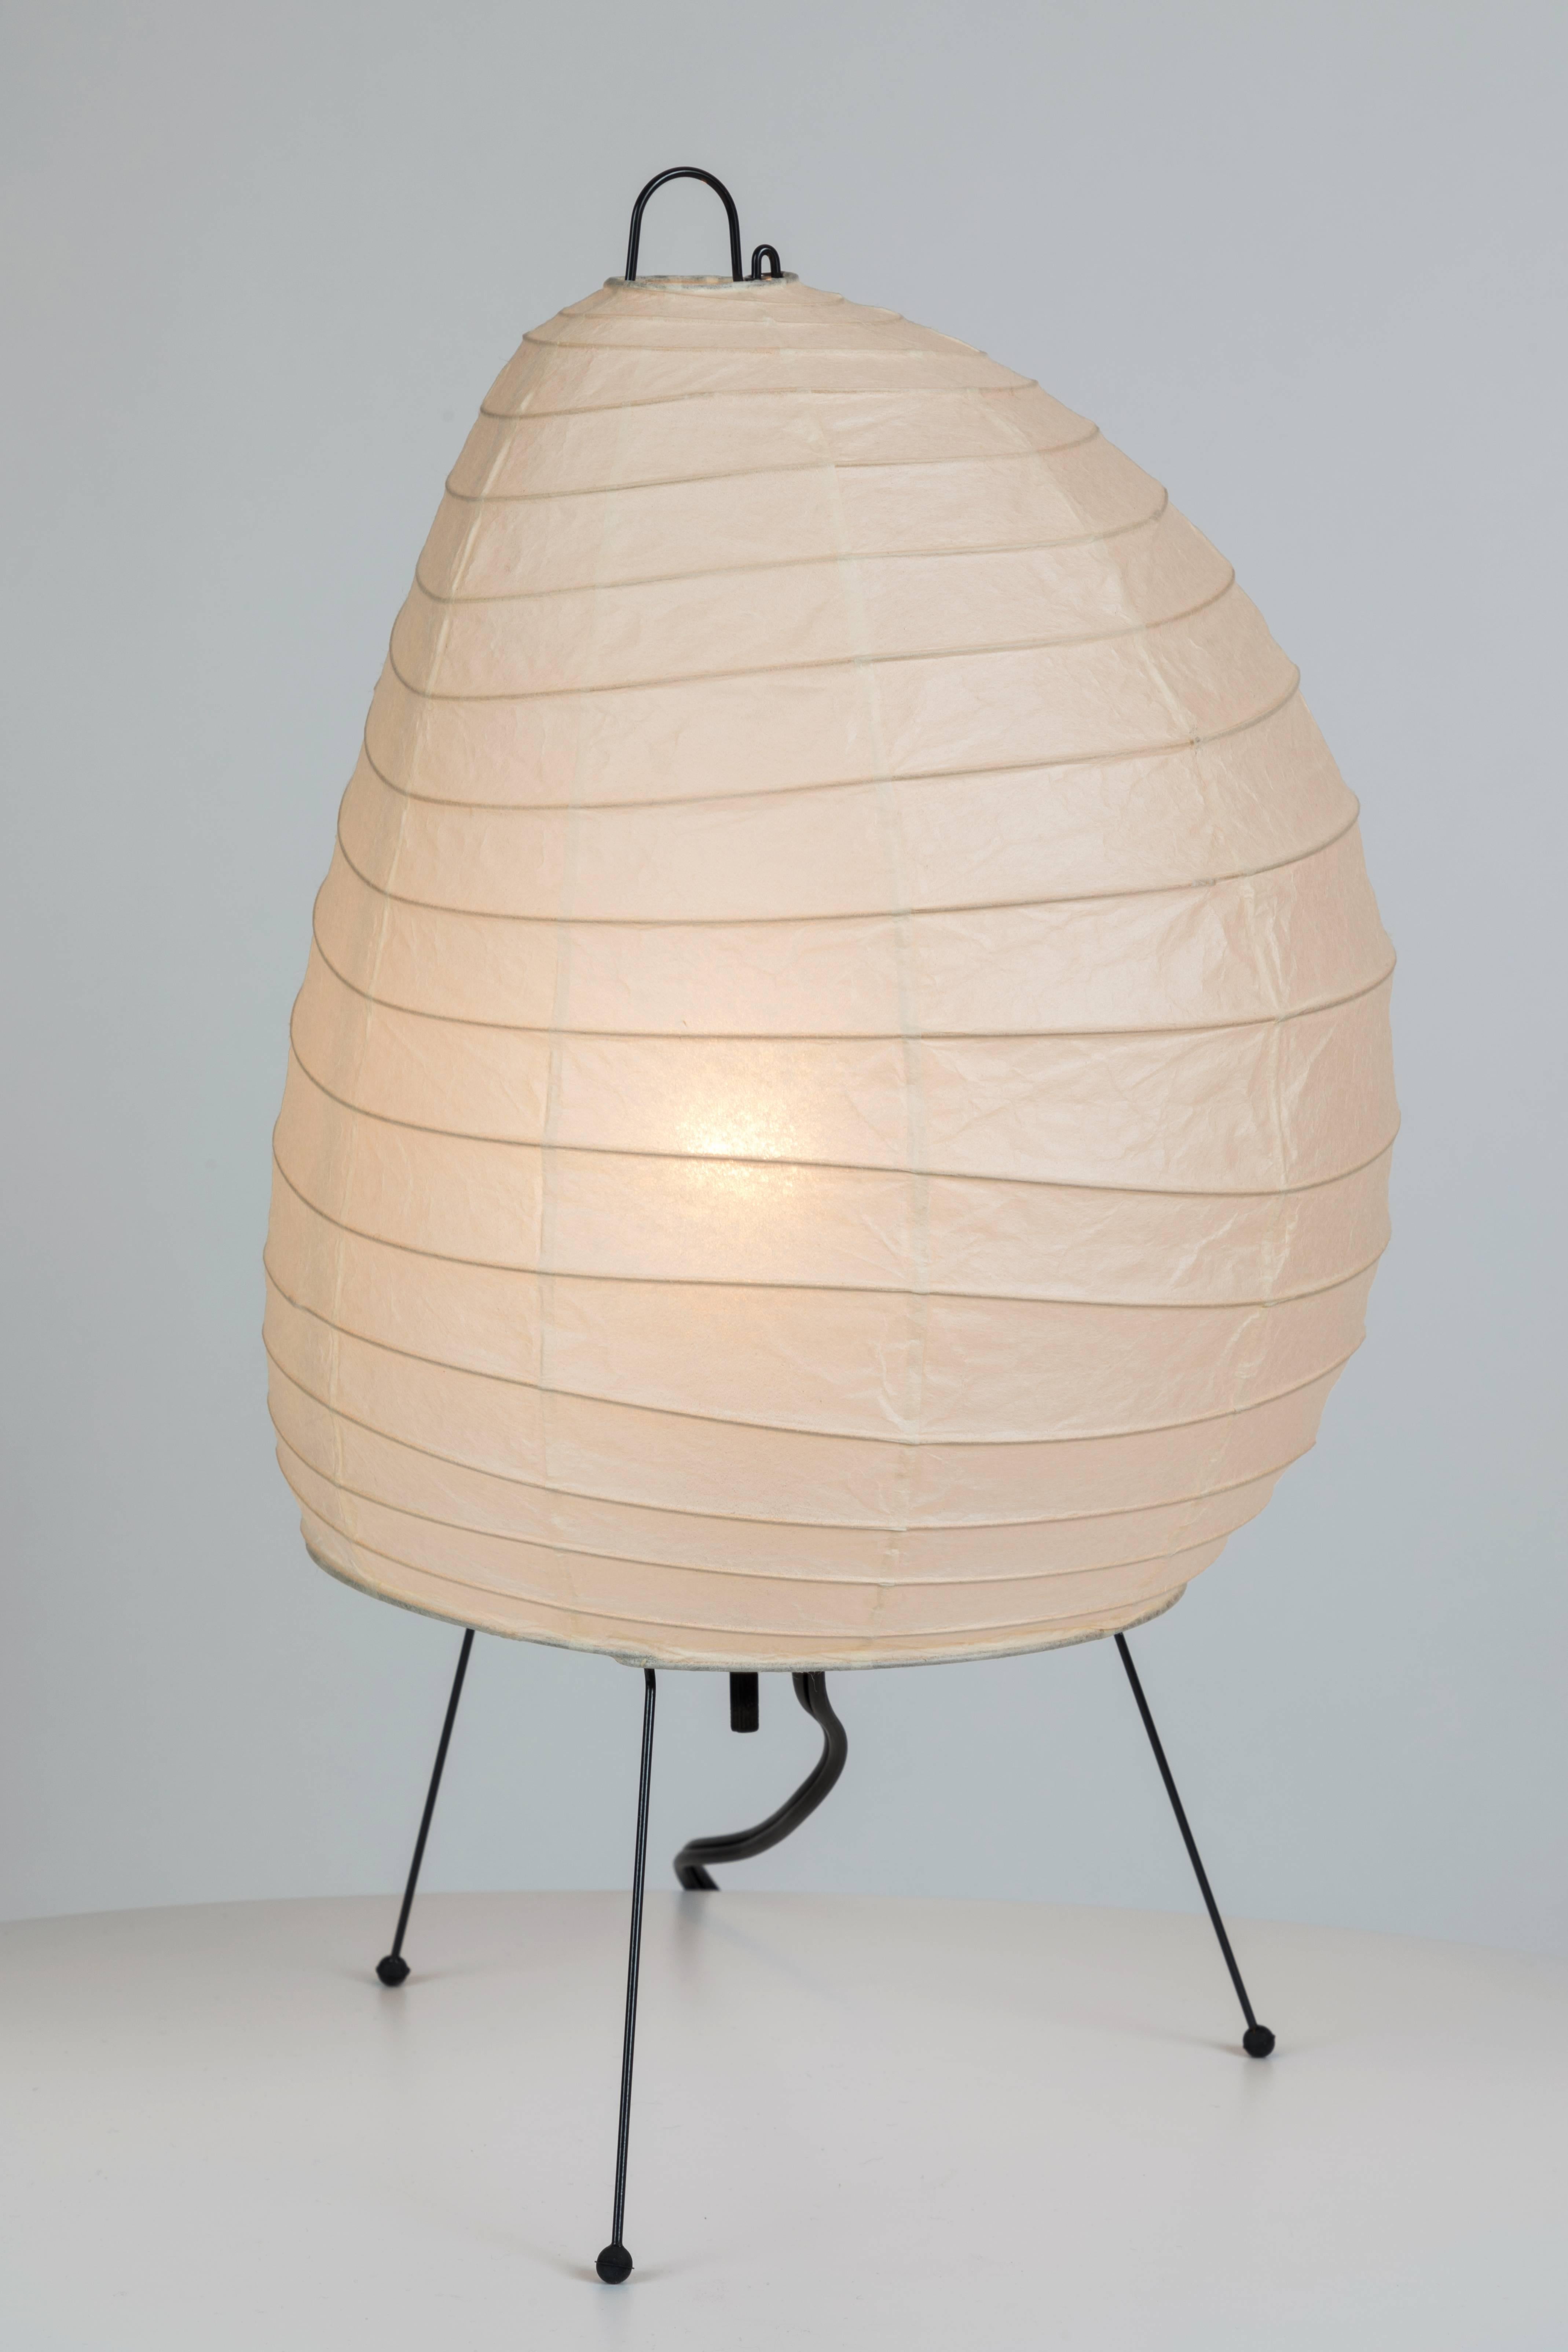 Akari Model 1N light sculpture by Isamu Noguchi. The shade is made from handmade washi paper and bamboo ribs with Noguchi Akari manufacturer's stamp. Akari light sculptures by Isamu Noguchi are considered icons of 1950s modern design. Designed by